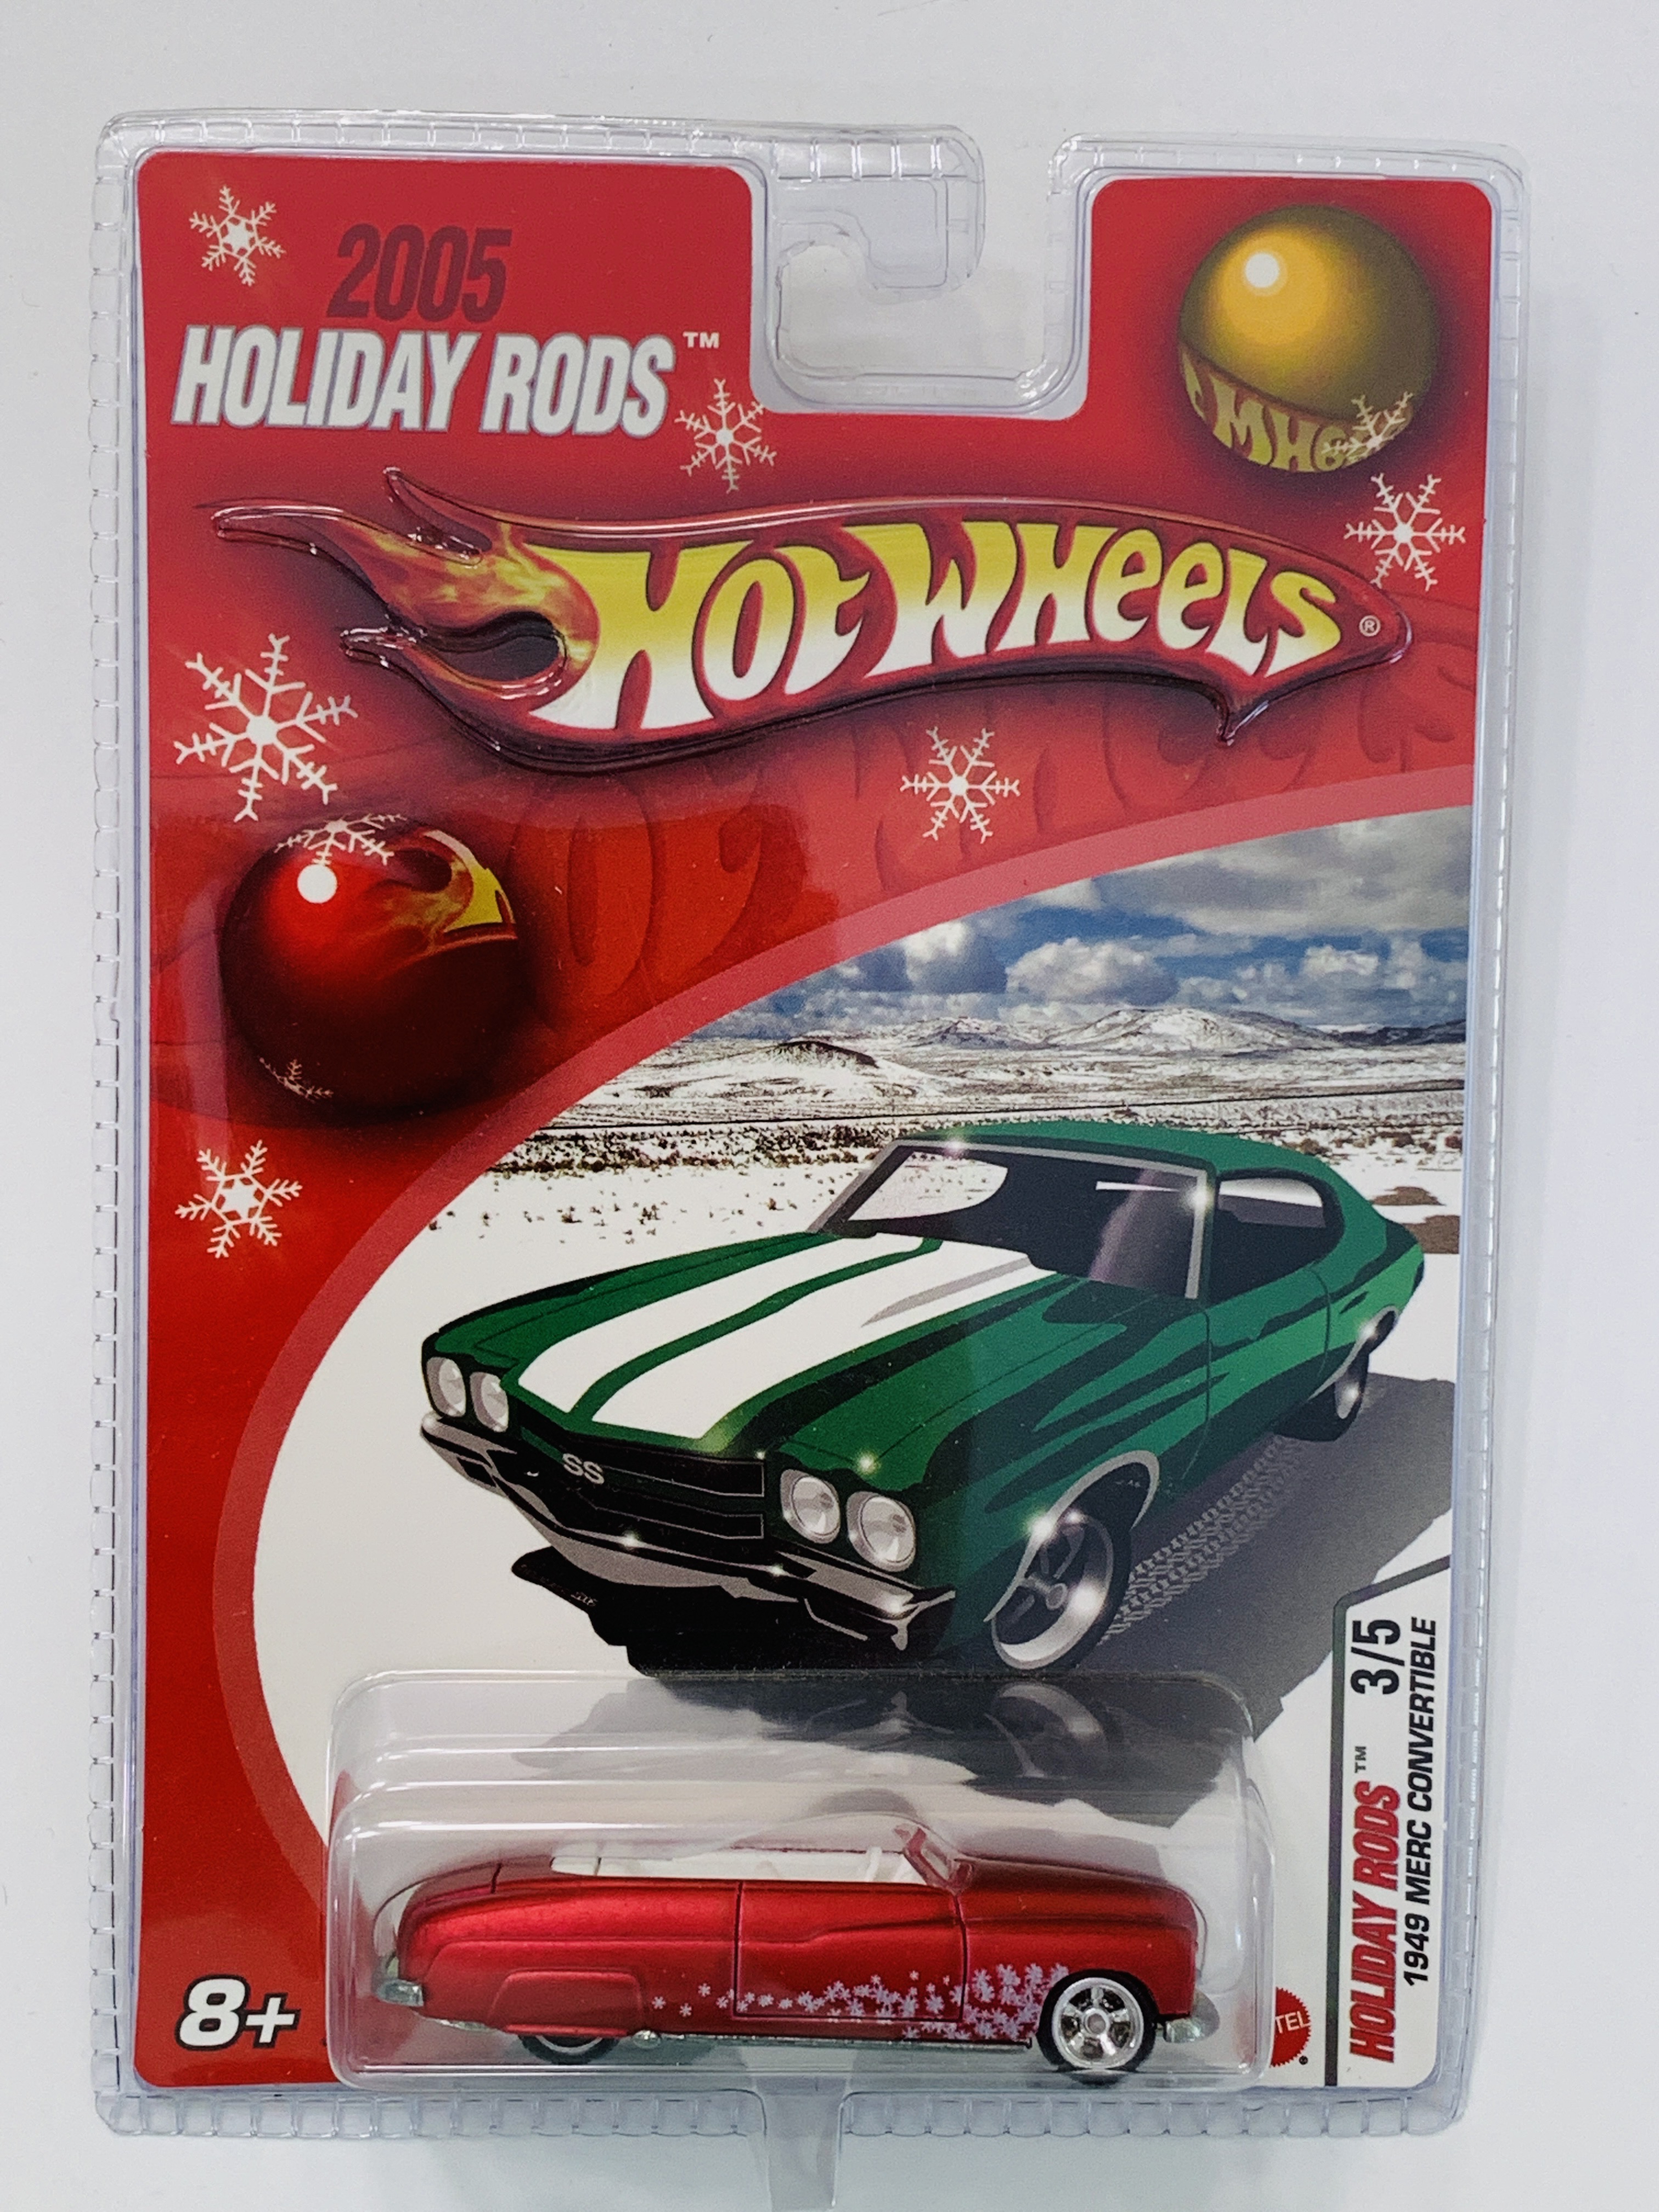 Hot Wheels 2005 Holiday Rods 1949 Merc Convertible - Red